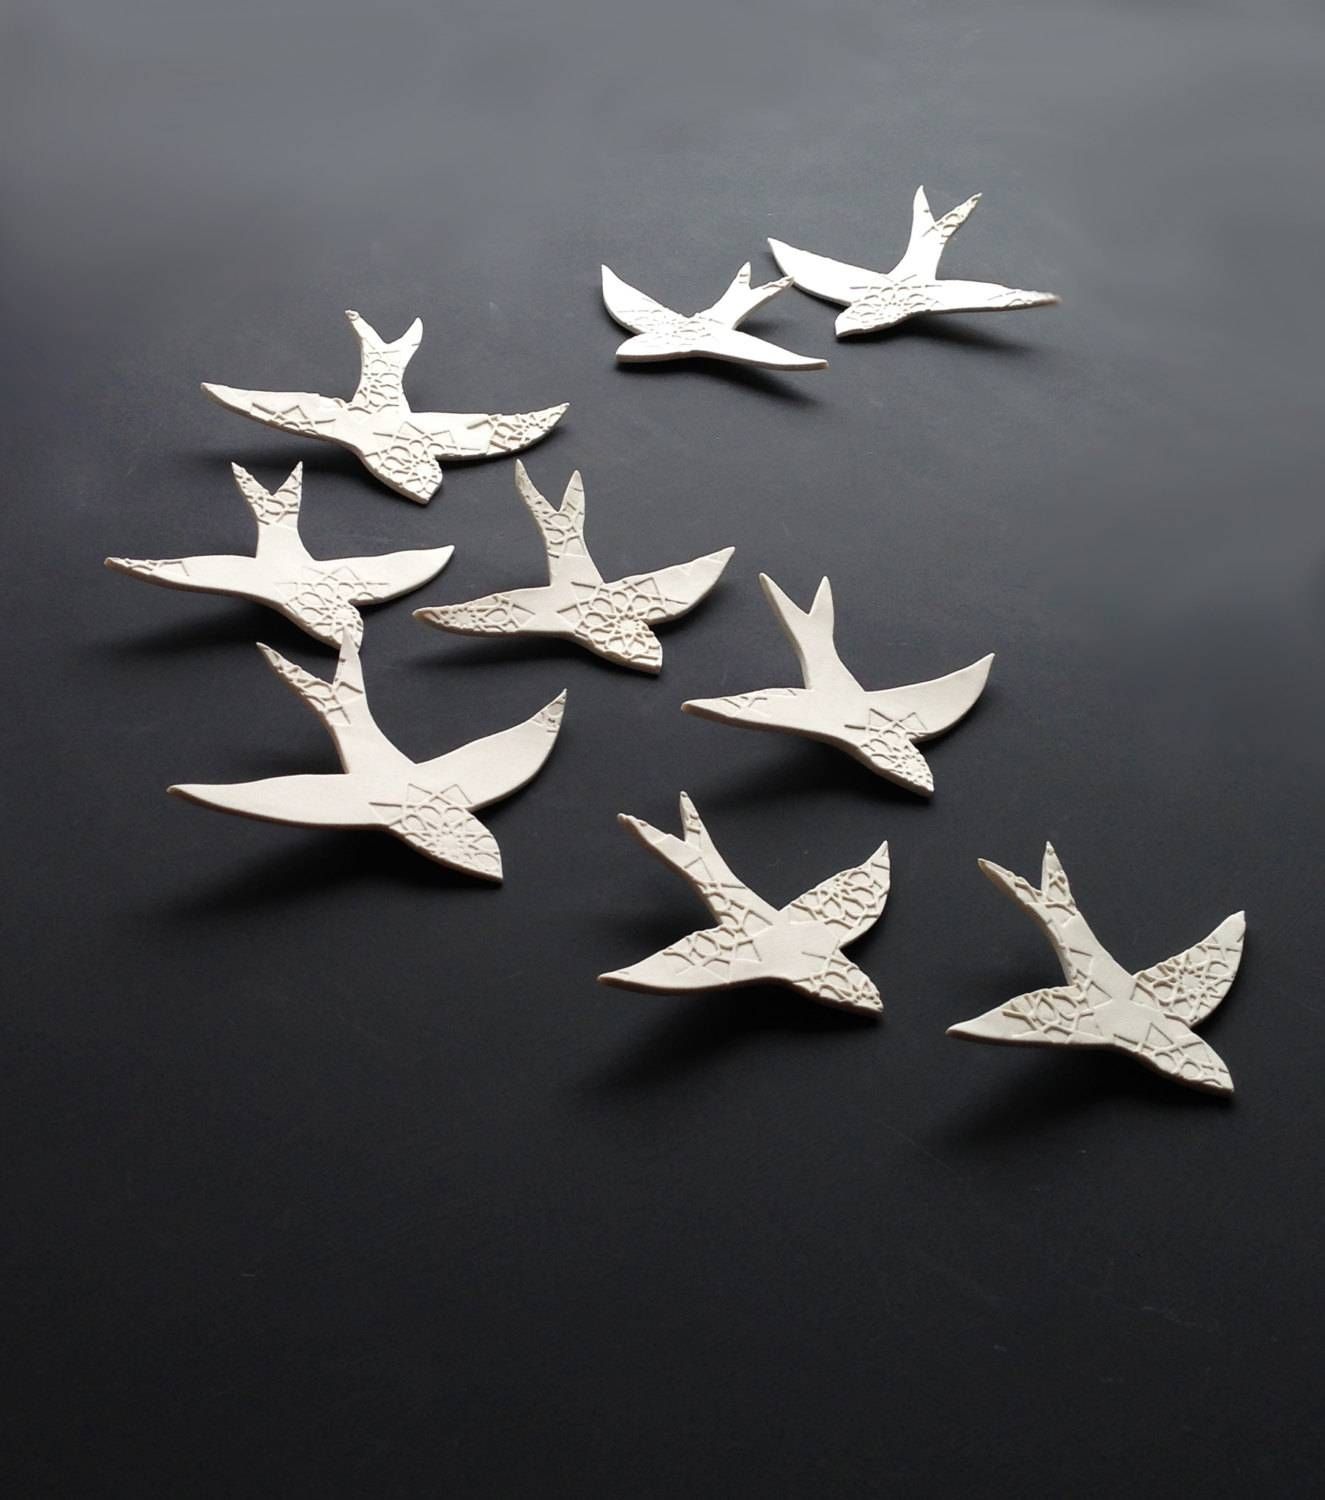 Porcelain 3d Large Wall Art Set Swallows Over Morocco 9 Birds For Best And Newest Ceramic Bird Wall Art (View 1 of 30)